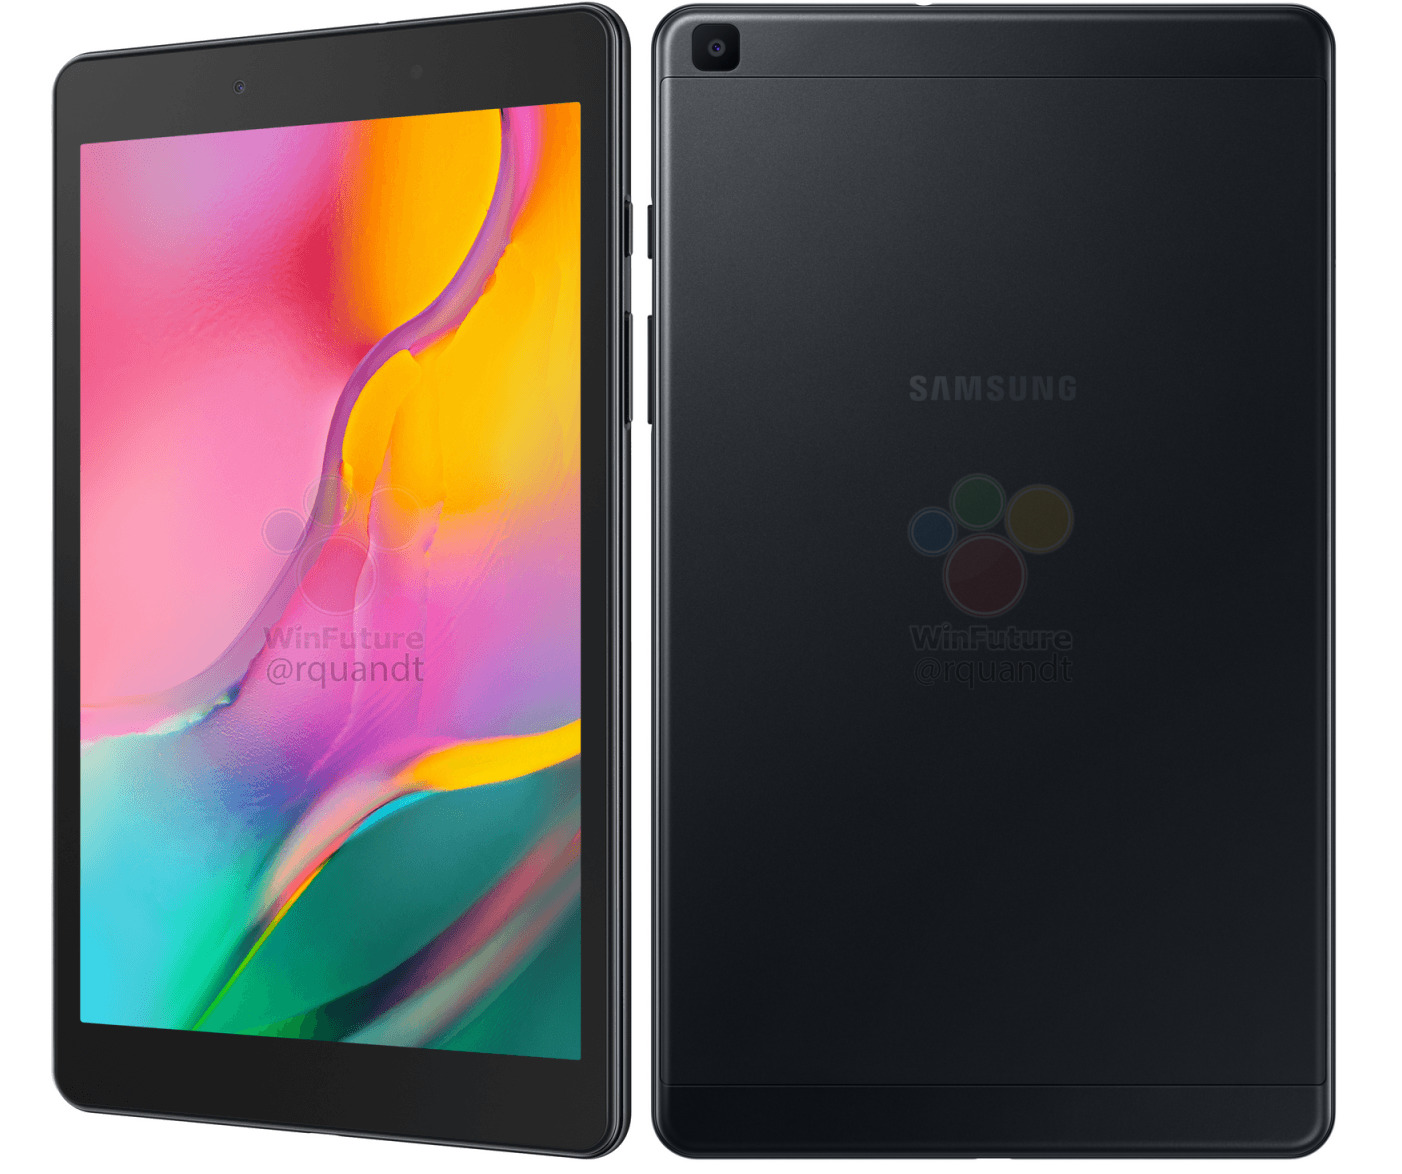 Samsung Galaxy Tab A8 : Cette tablette tactile abordable le